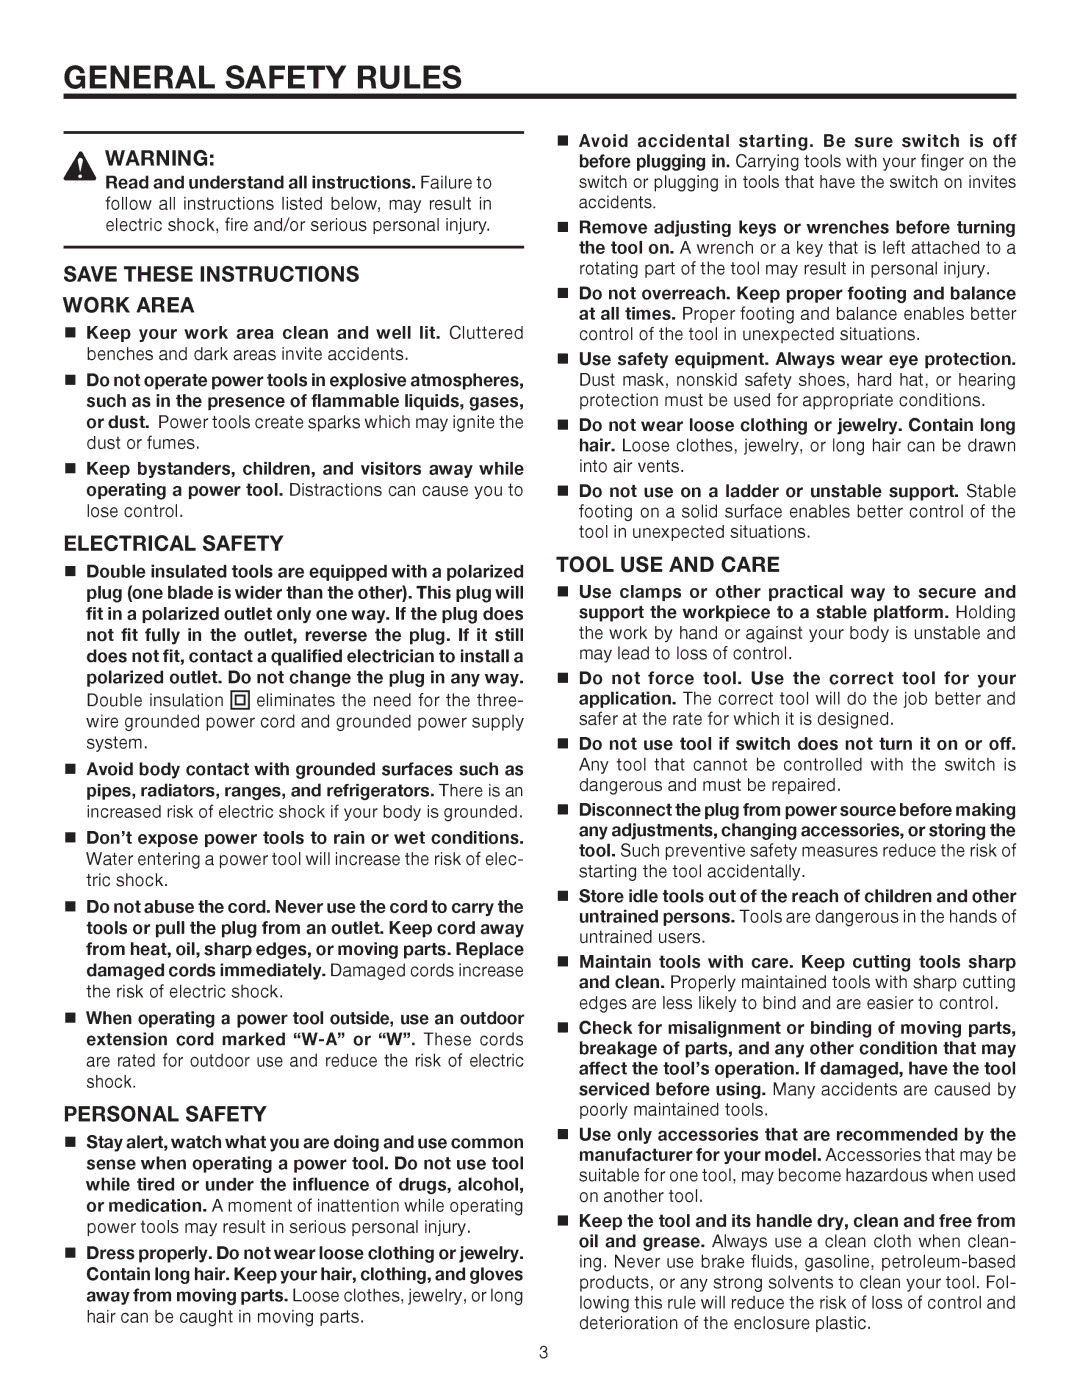 RIDGID R6300 manual General Safety Rules, Work Area, Electrical Safety, Personal Safety, Tool USE and Care 